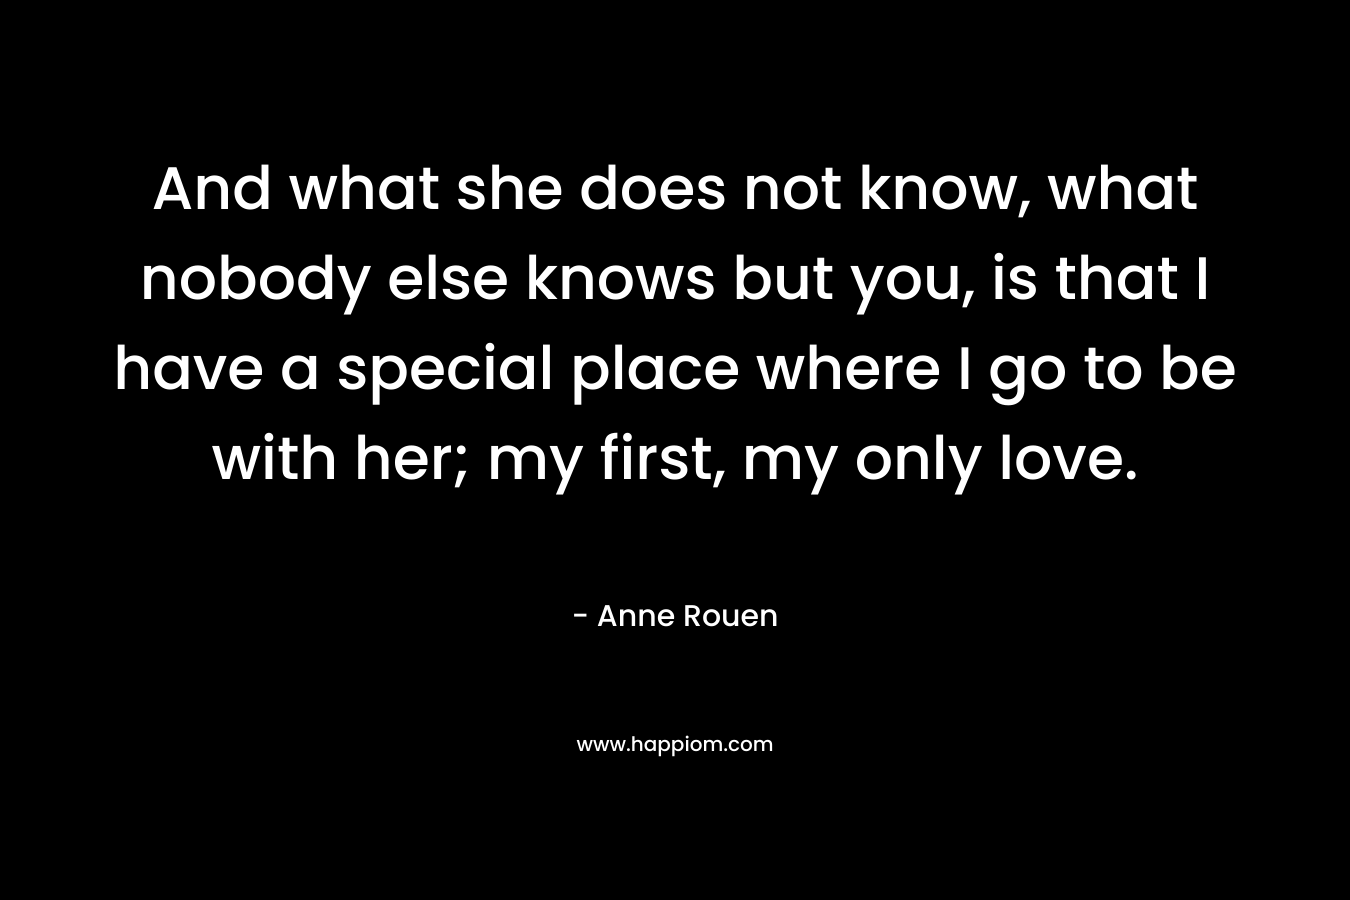 And what she does not know, what nobody else knows but you, is that I have a special place where I go to be with her; my first, my only love. – Anne Rouen